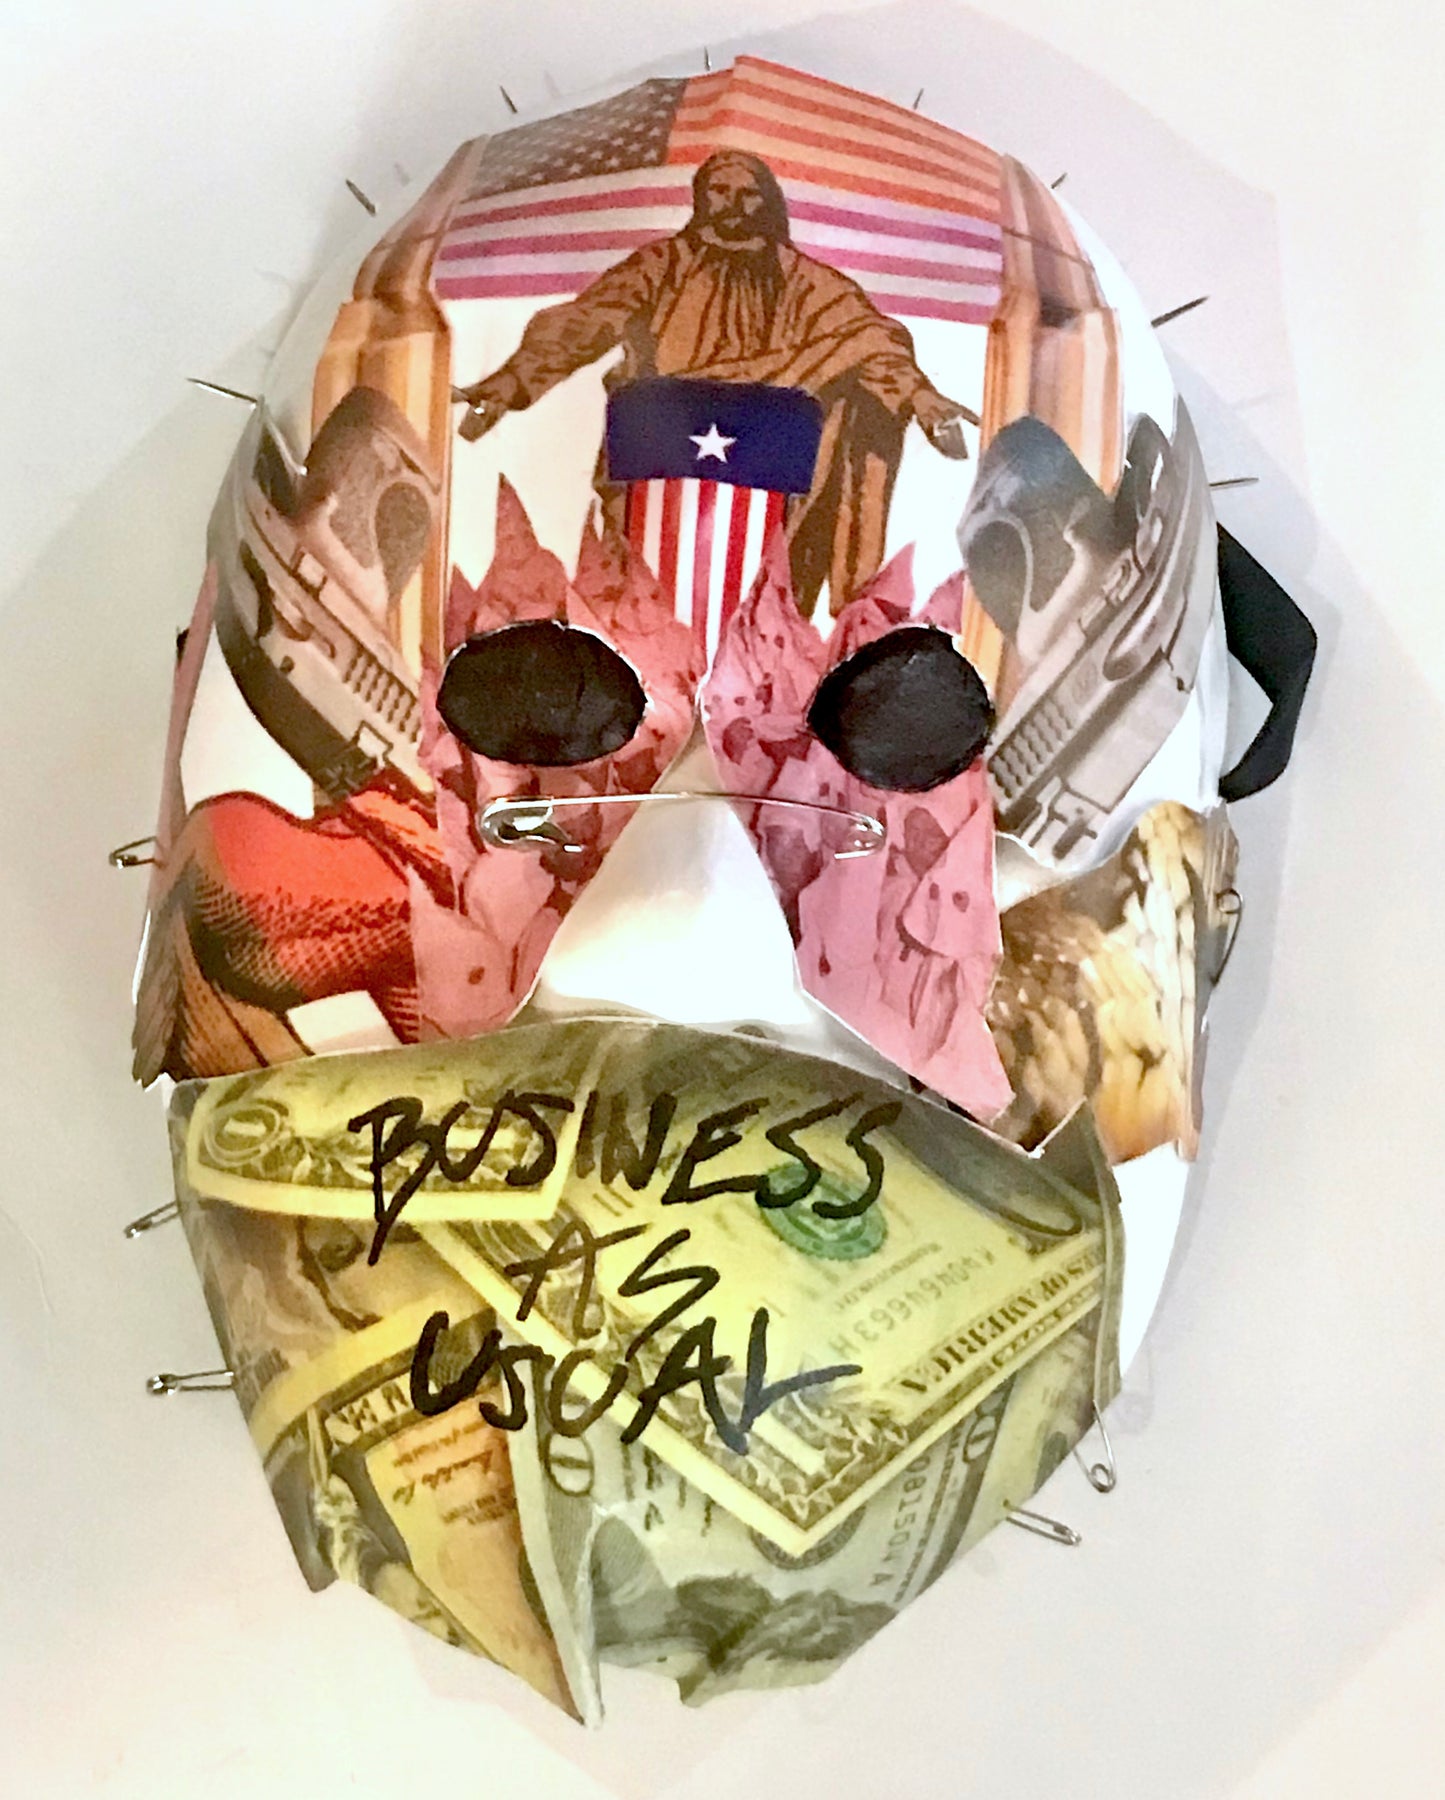 Sour Steve "Business As Usual" Mask (2022)